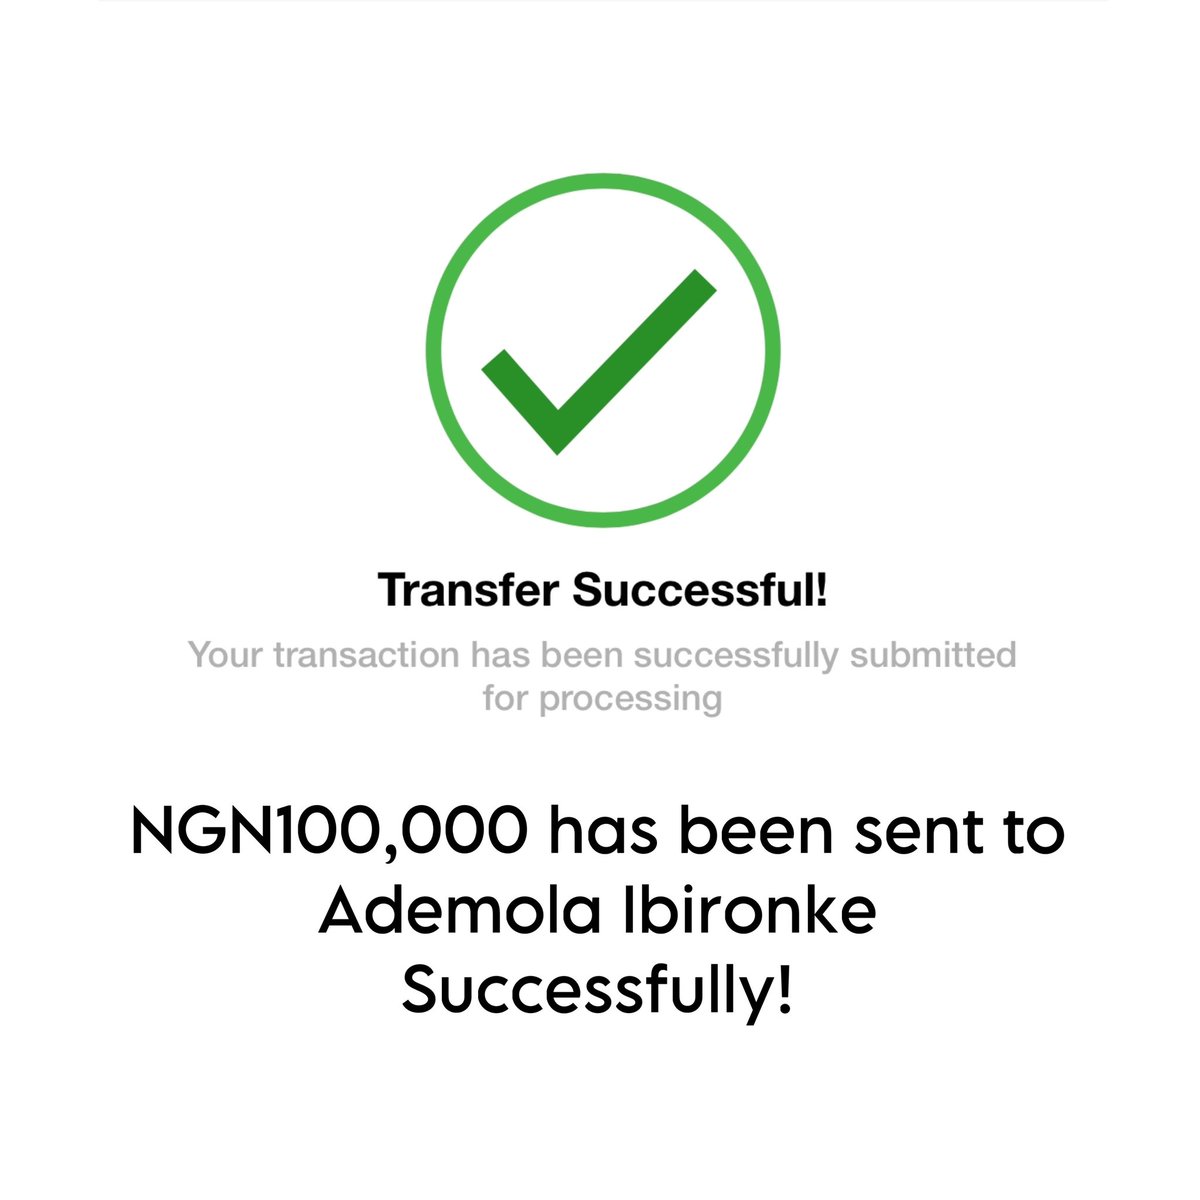 Two actives credited successfully ✅

If you're active, drop your details asap 👇